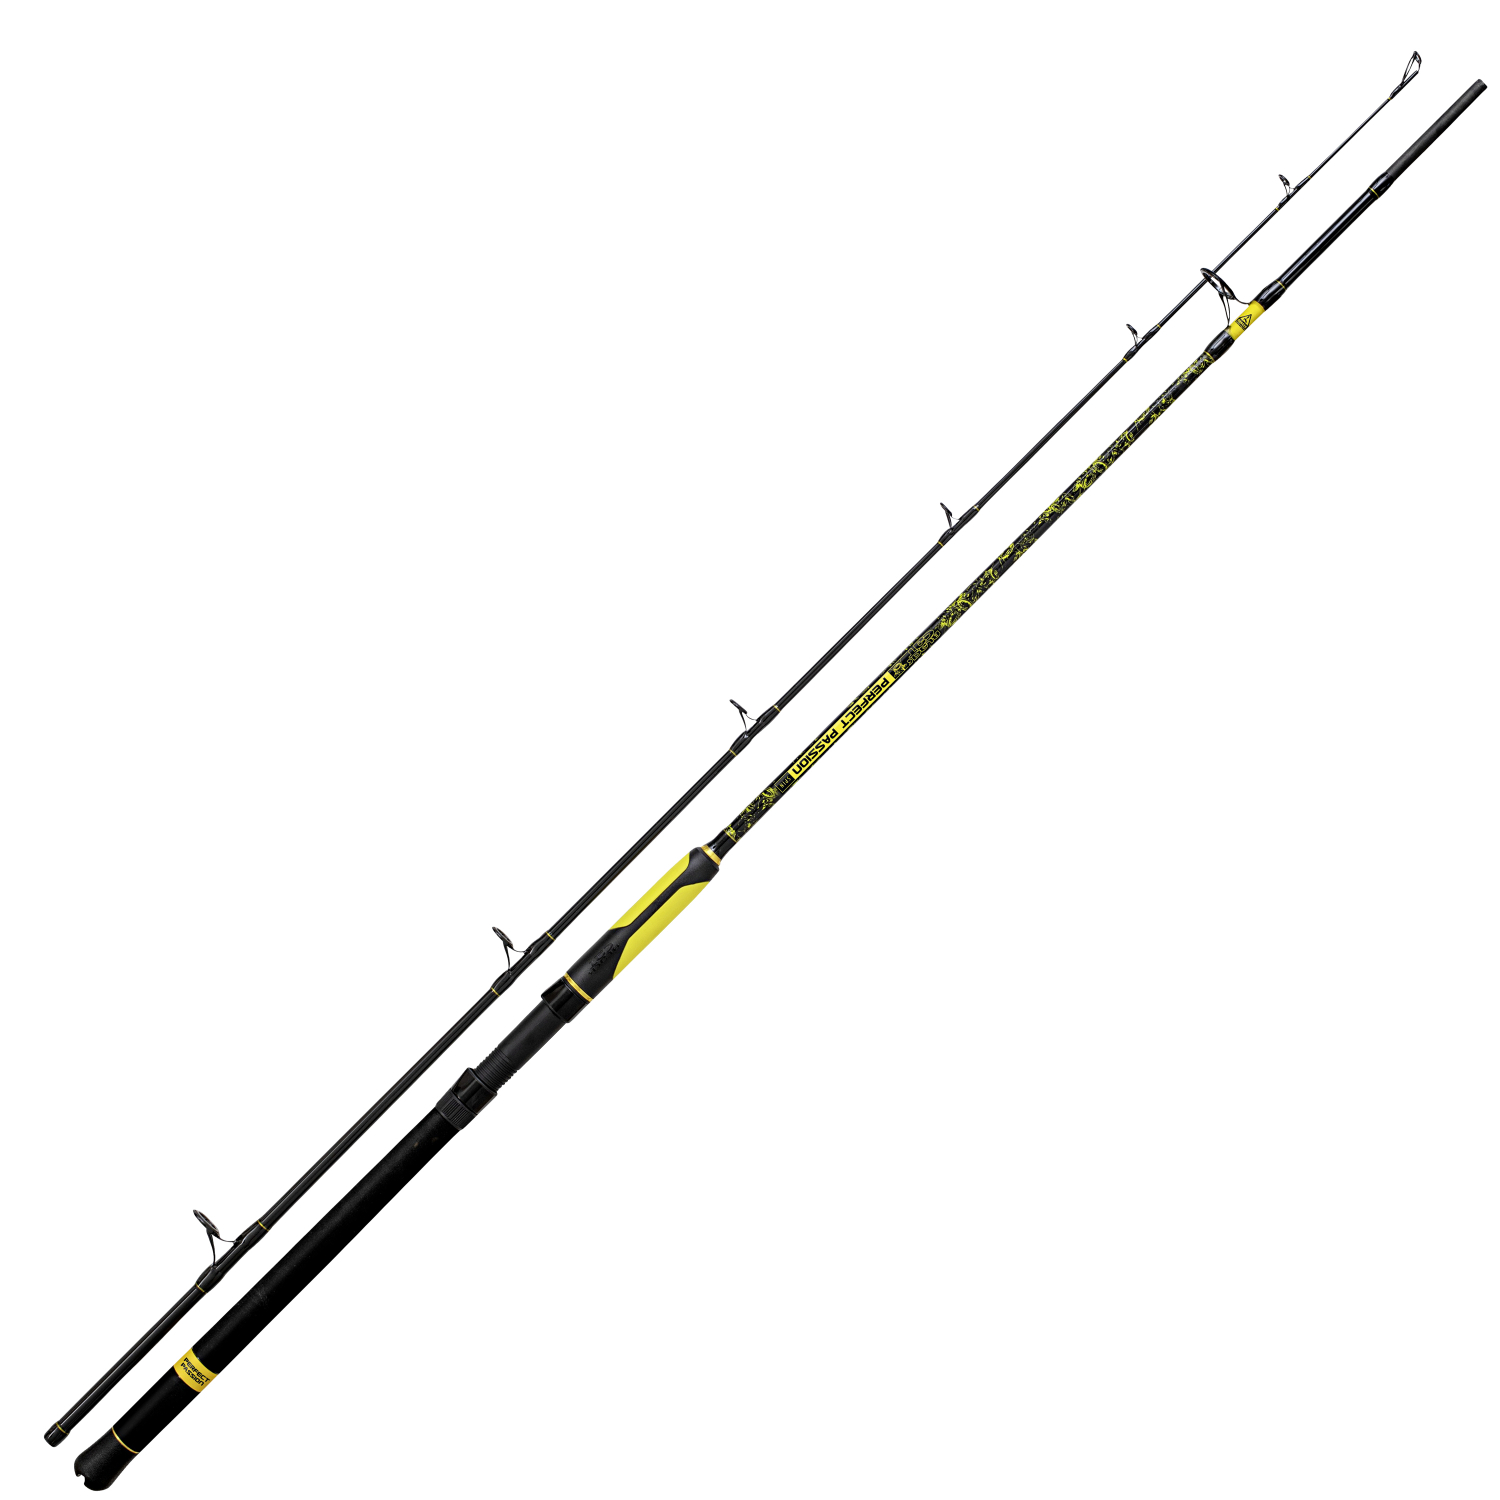 Black Cat Fishing Rod Perfect Passion Spin at low prices